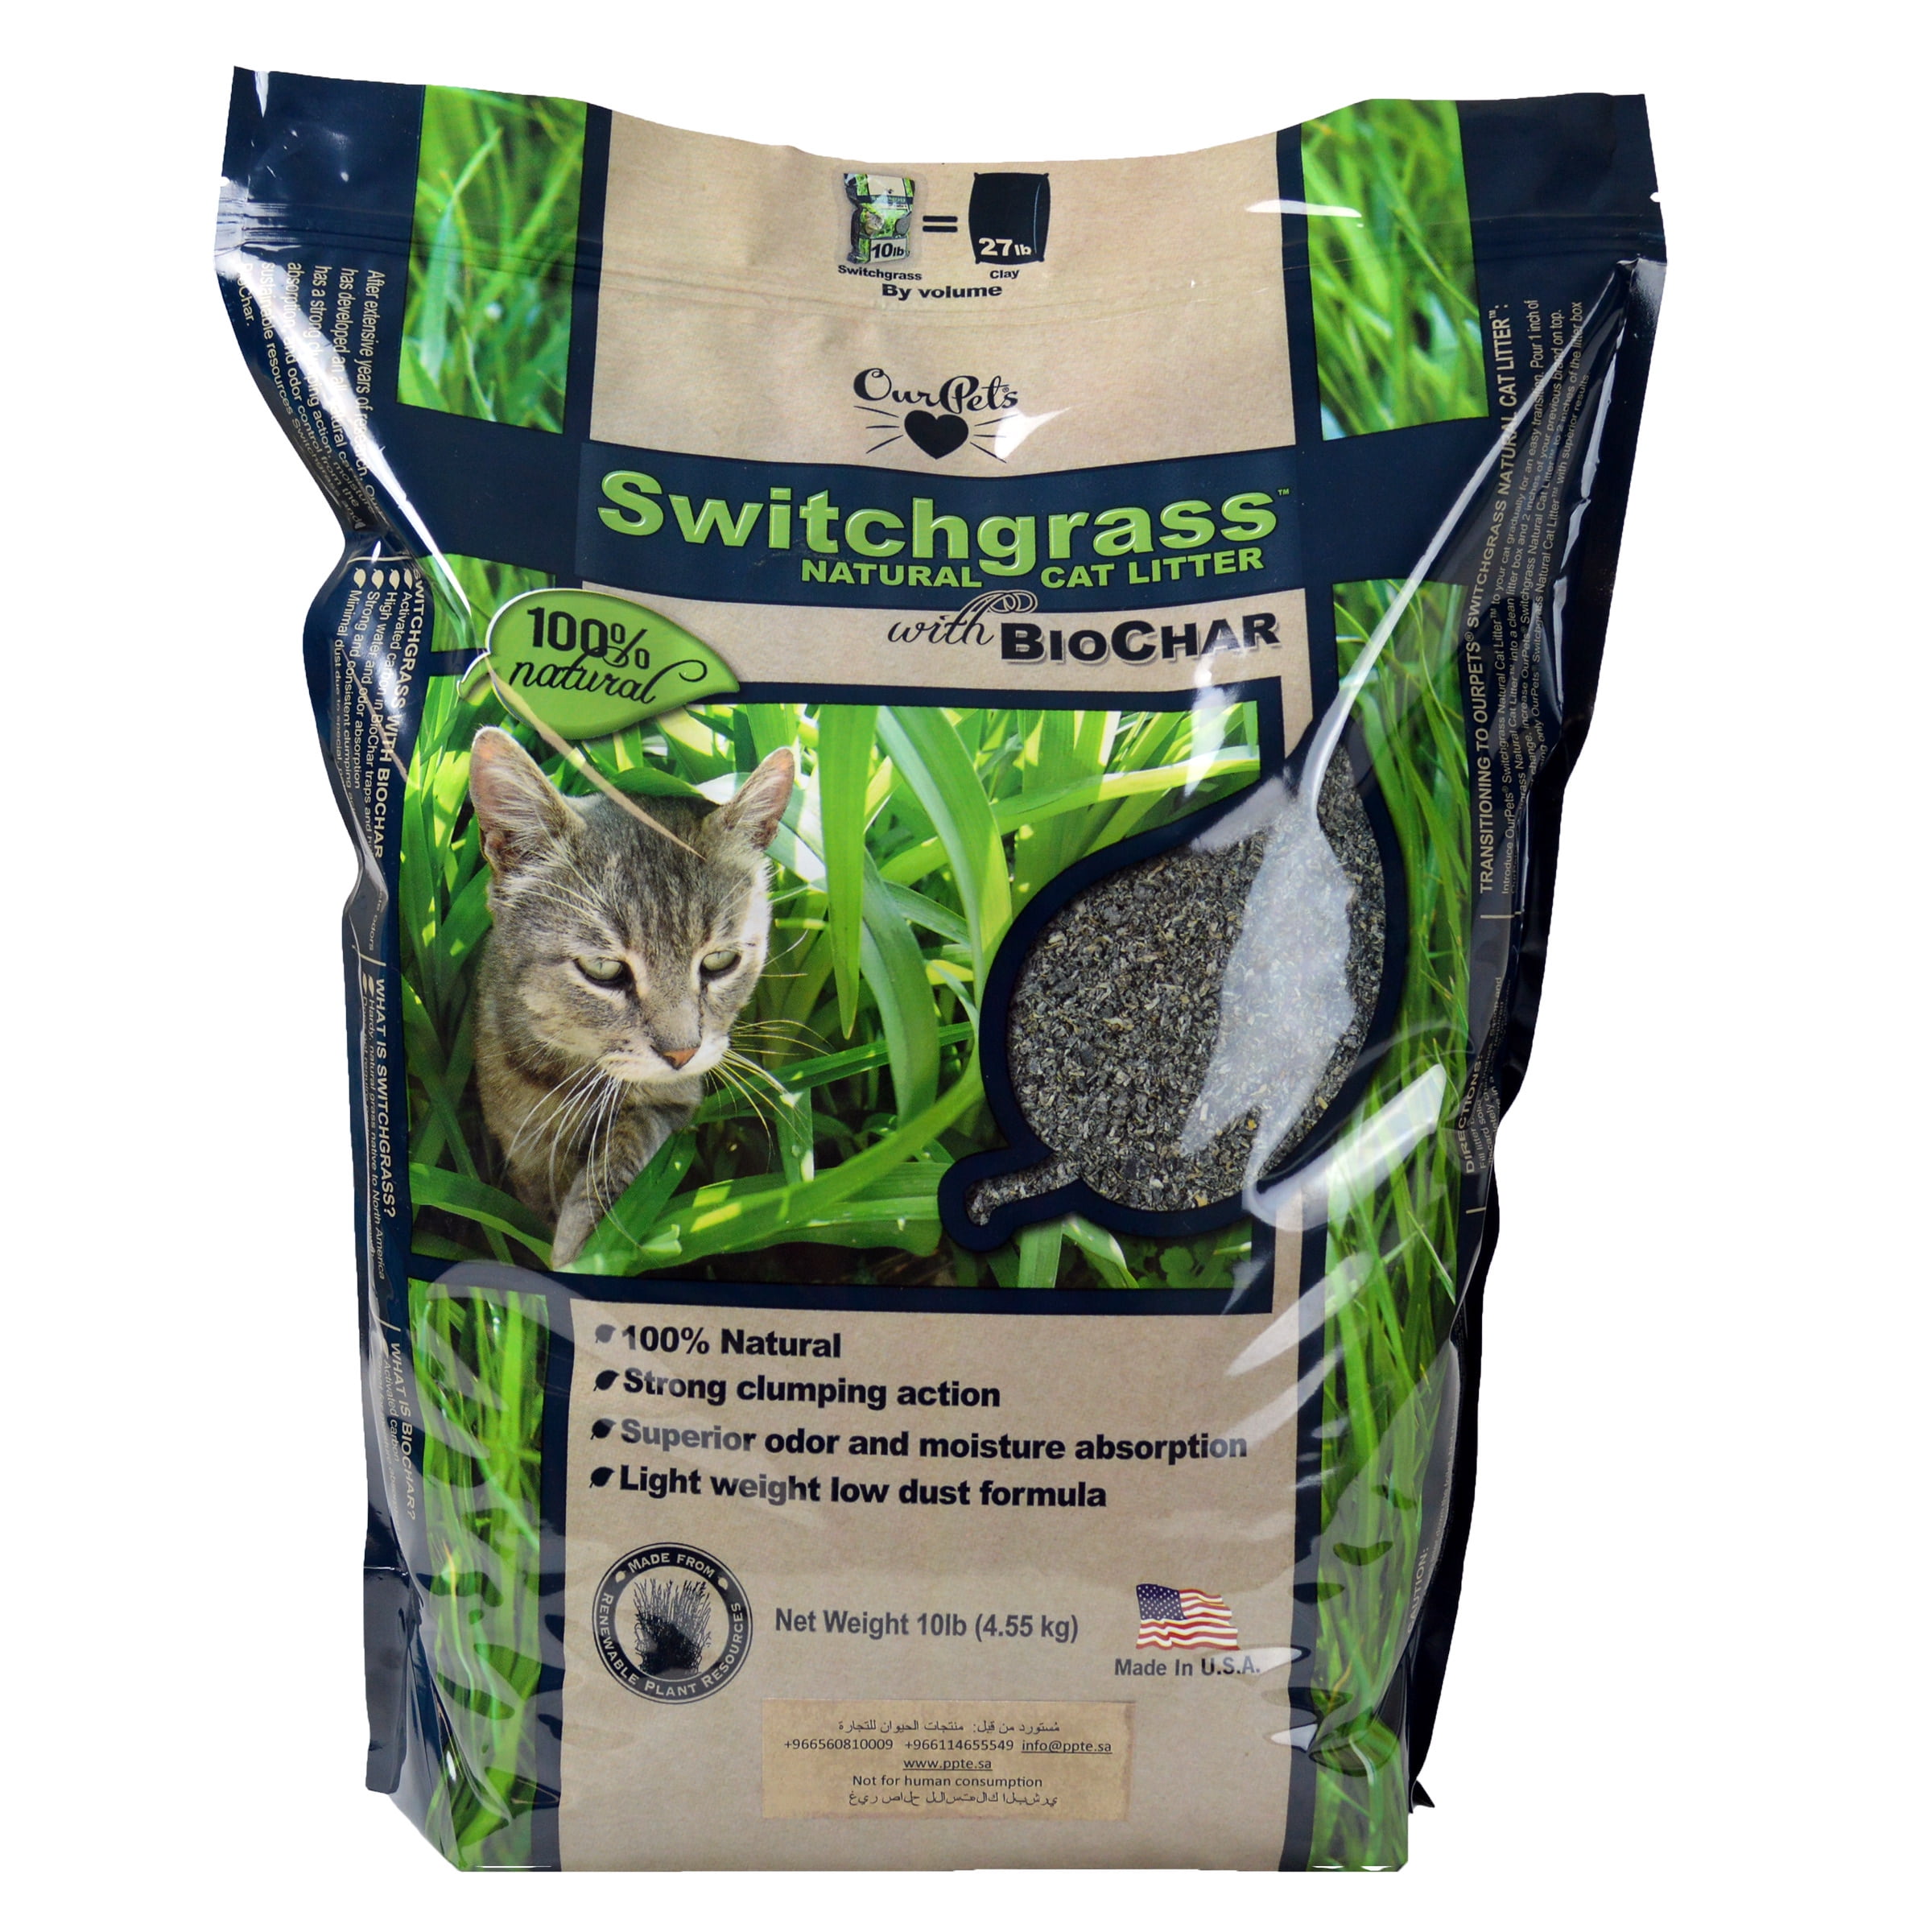 Ourpets Switchgrass Natural Cat Litter With Biochar 10Lb Bag